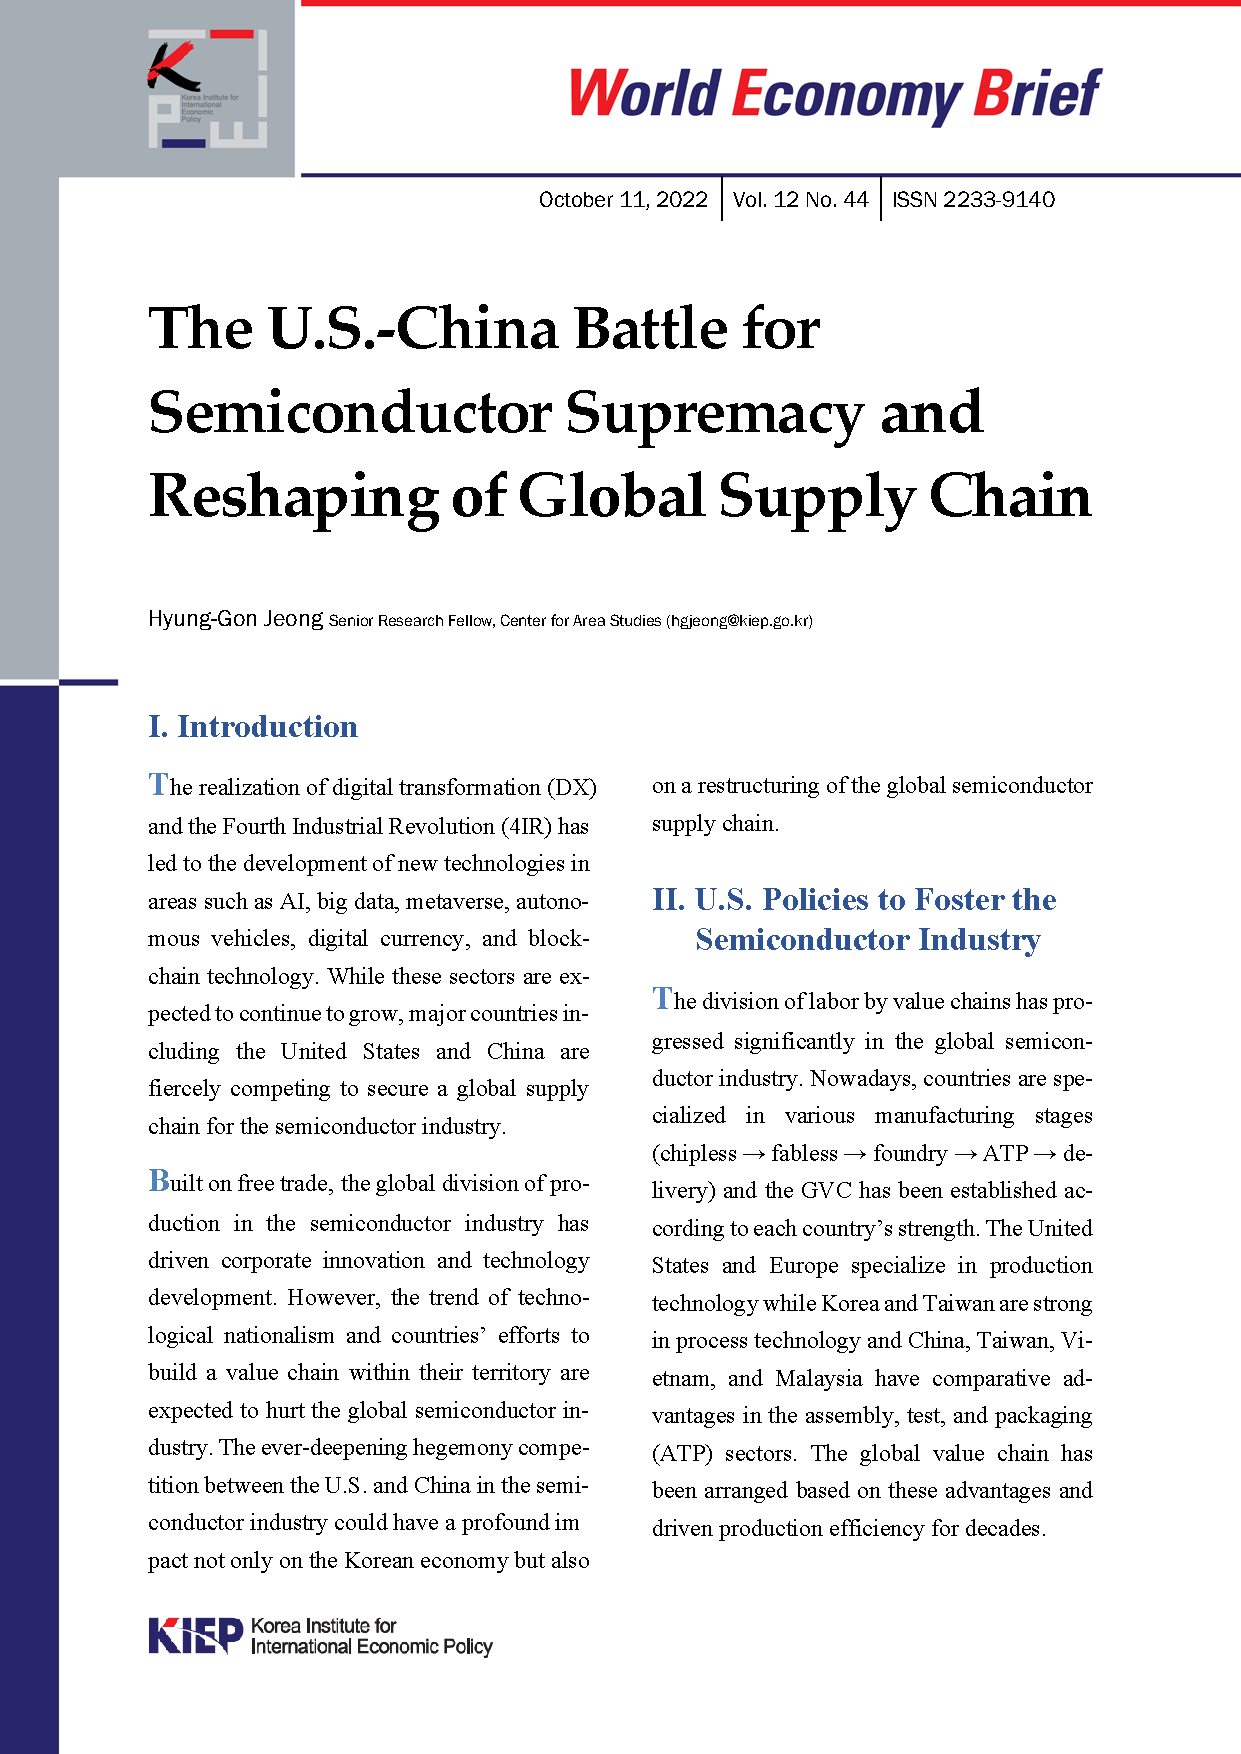 The U.S.-China Battle for Semiconductor Supremacy and Reshaping of Global Supply Chain